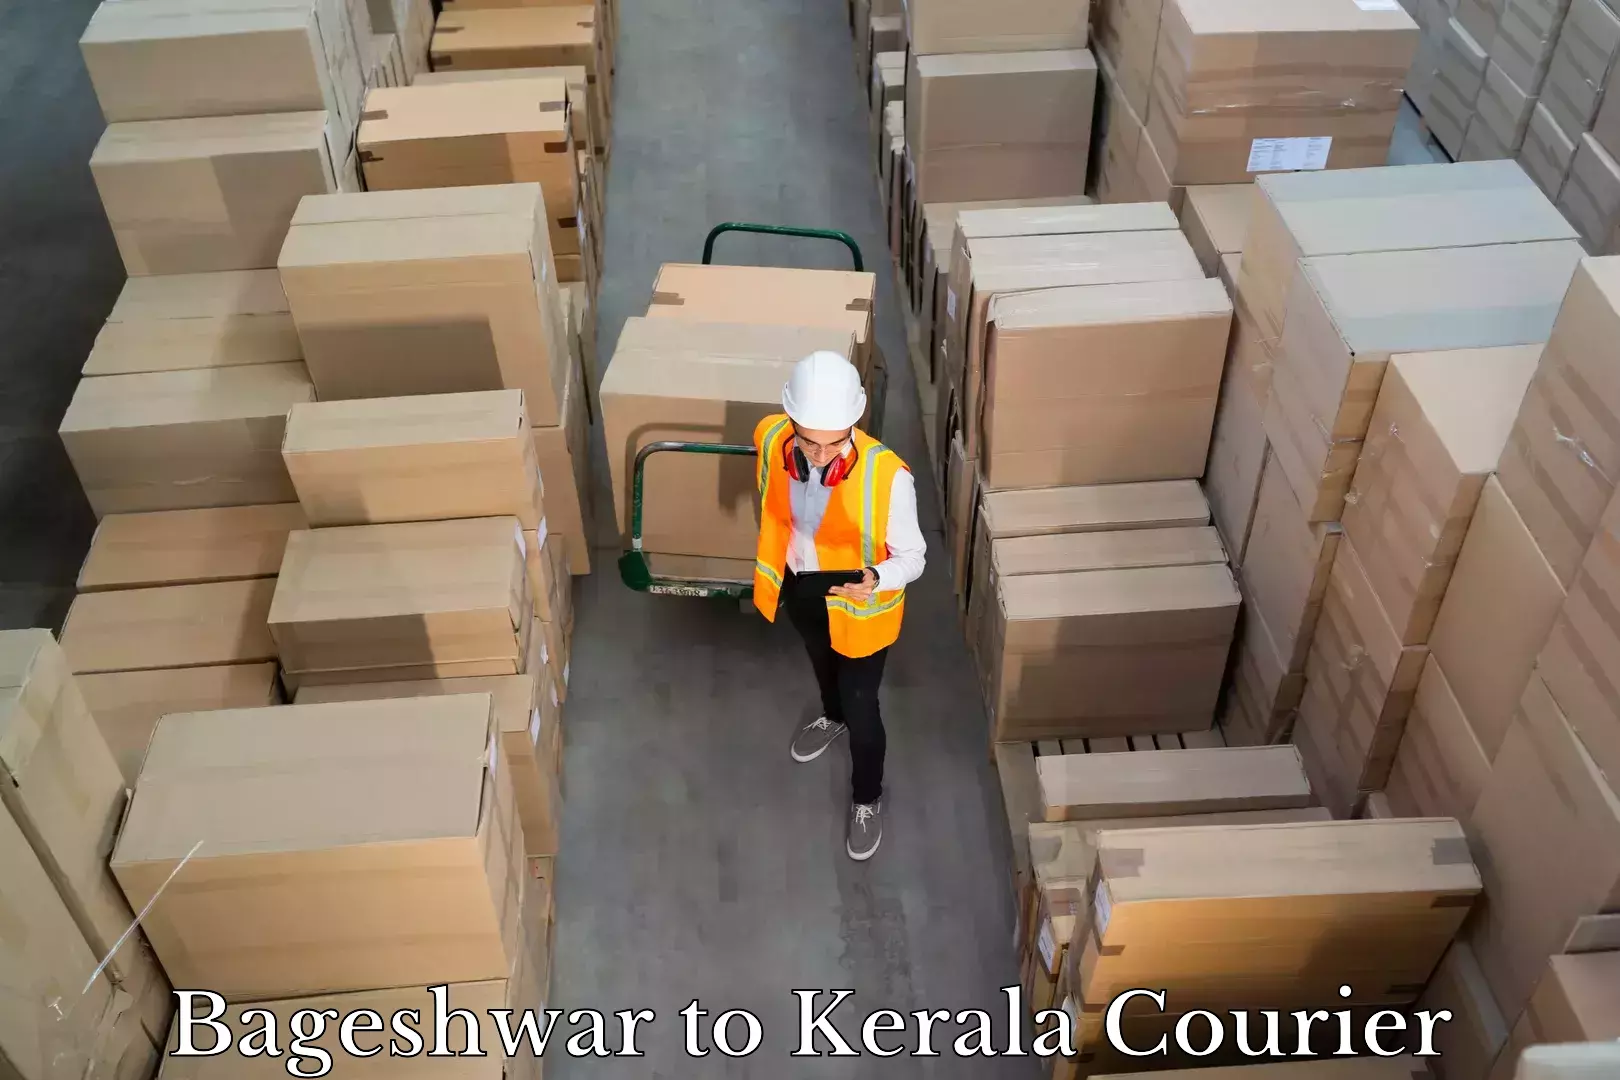 Luggage shipment specialists Bageshwar to Kerala